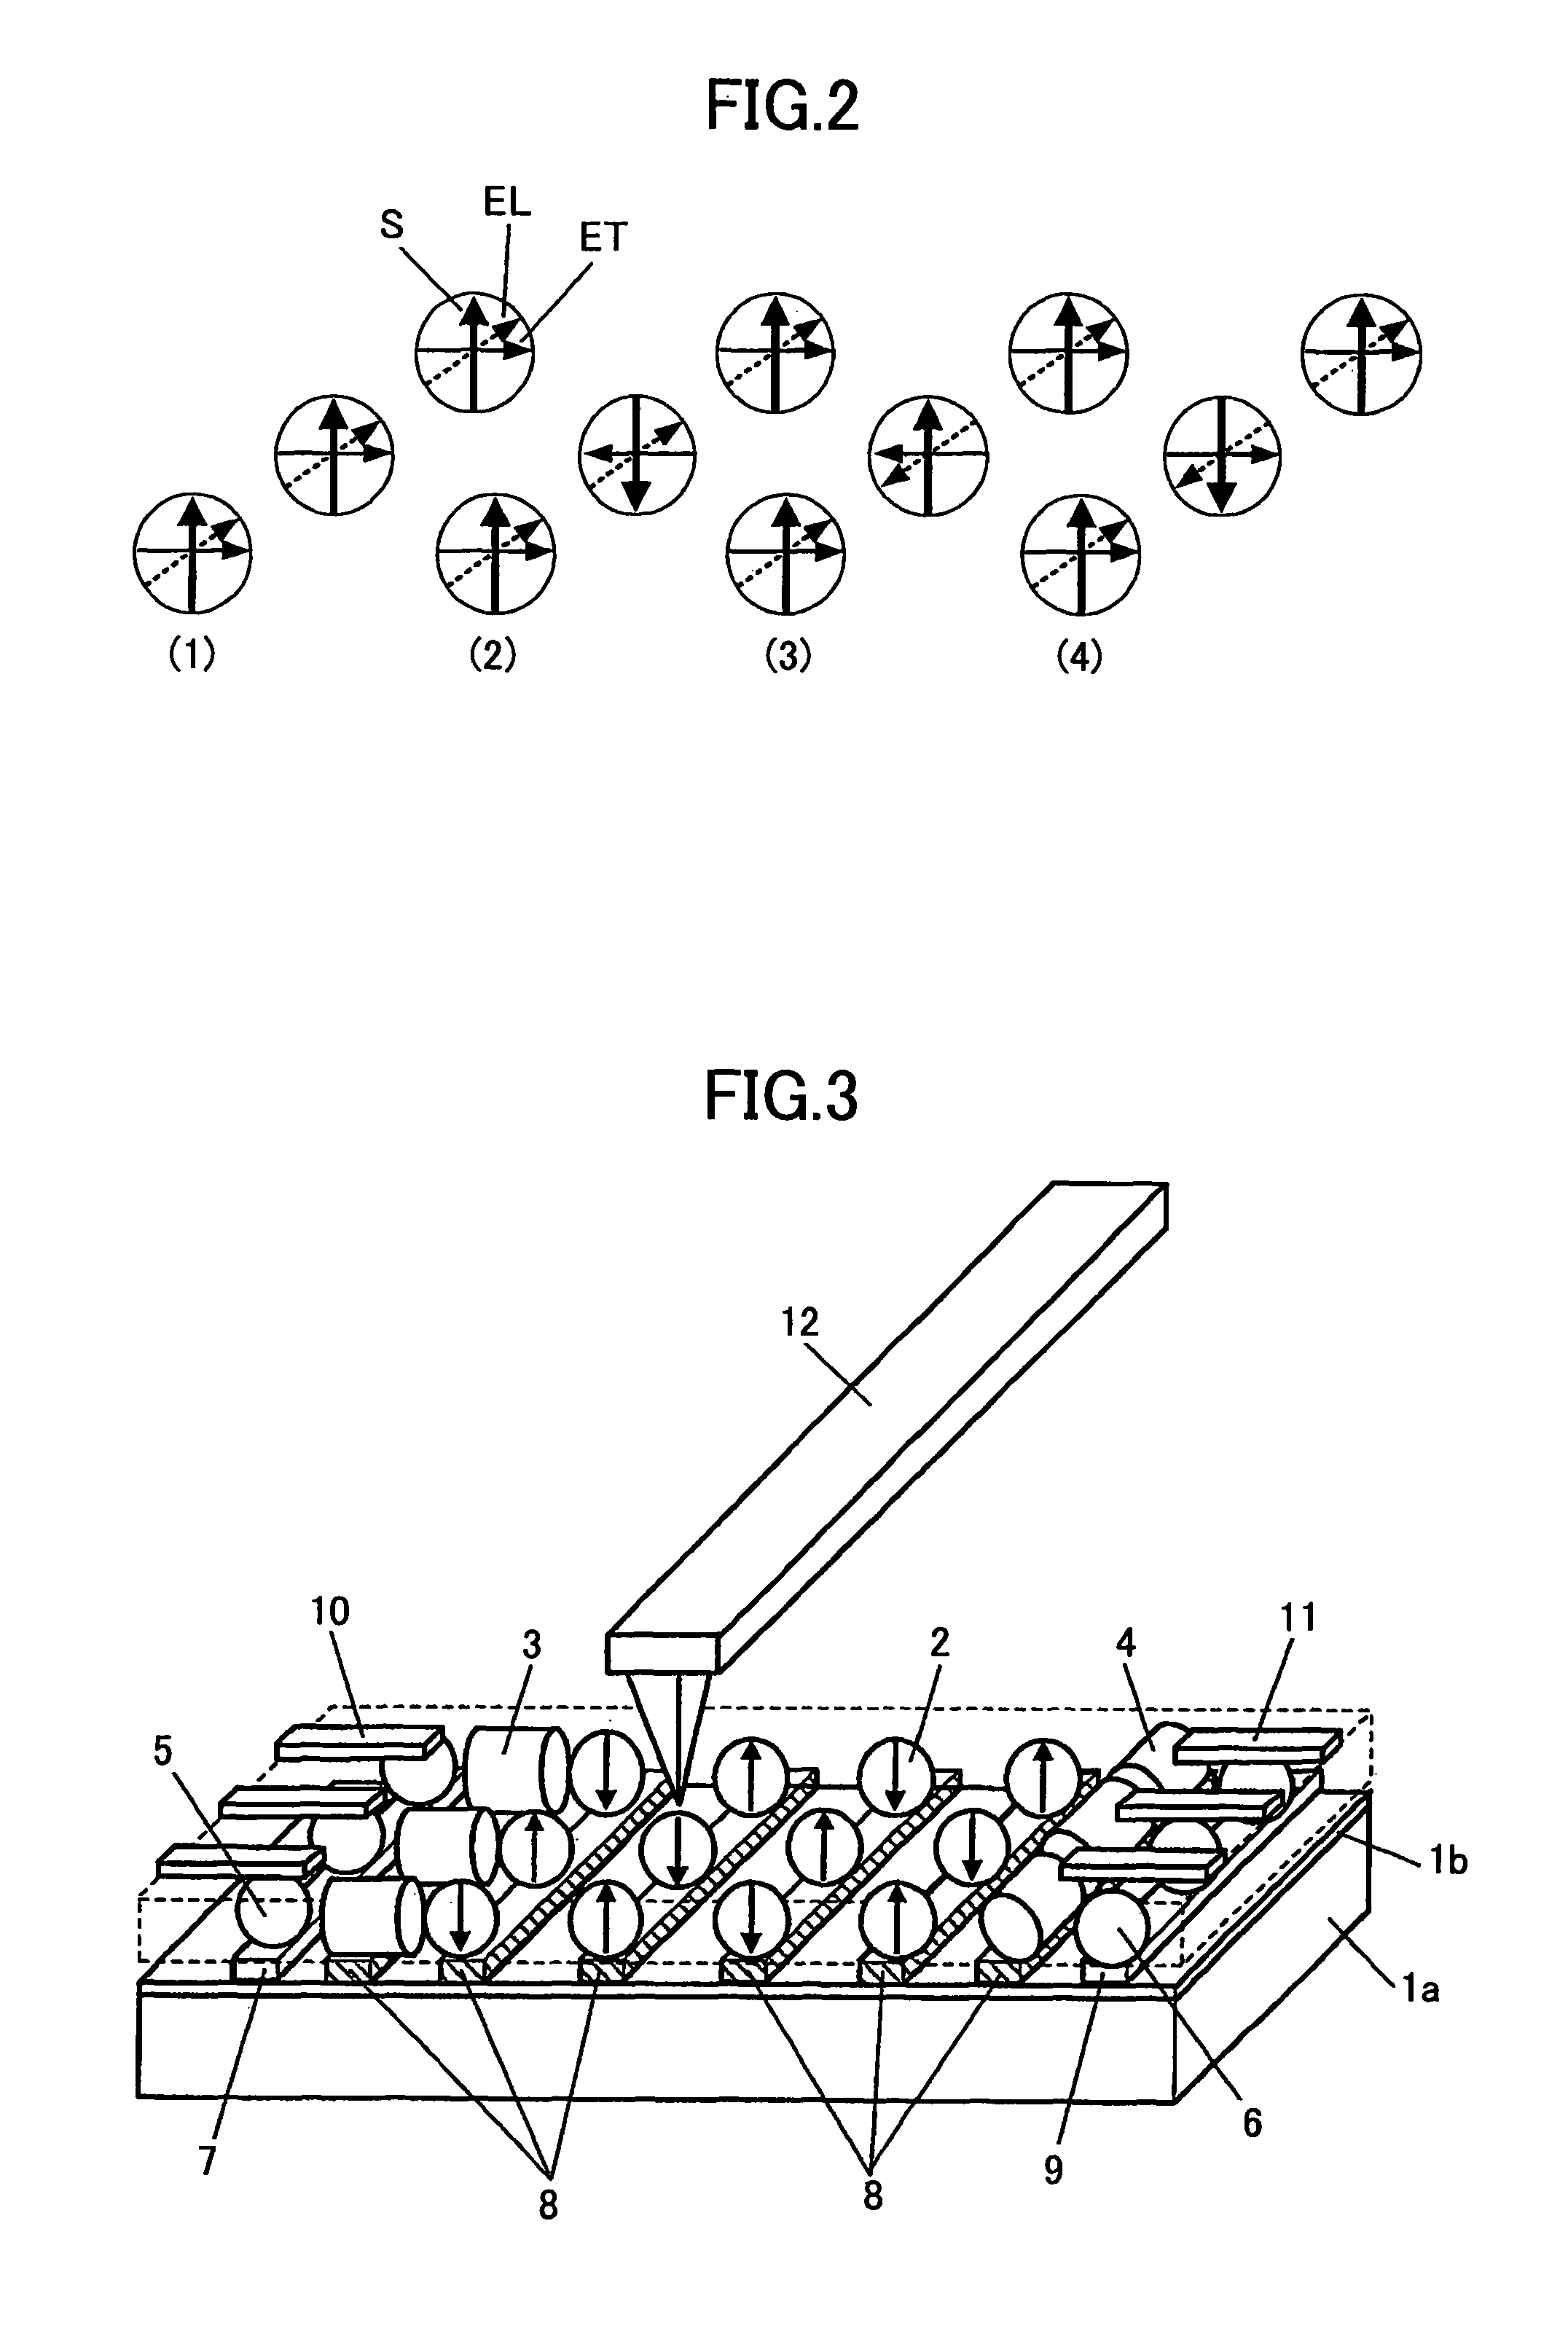 Information recording method and apparatus using plasmonic transmission along line of ferromagnetic nano-particles with reproducing method using fade-in memory